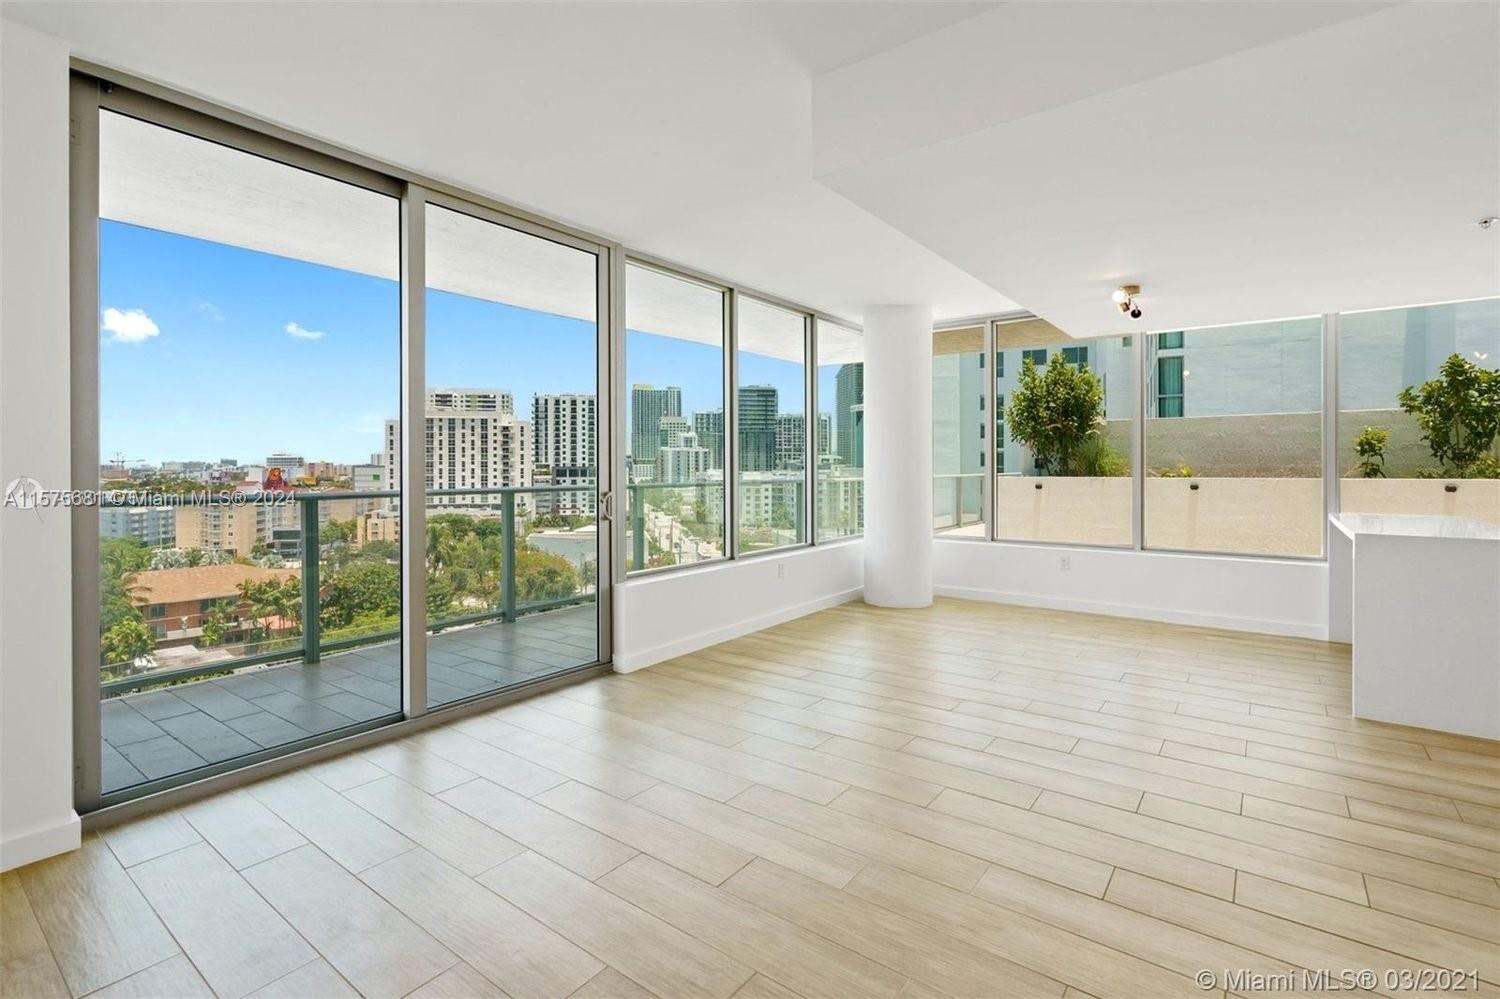 Experience luxury living in this chic west-facing corner unit at LeParc at Brickell. With a massive 990 Sqft wrap-around balcony offering stunning sunset views, 2 bedrooms, 2 bathrooms, and 1 parking space, this residence is both stylish and convenient. Enjoy easy access to I-95, Brickell, and Coral Way, ensuring seamless commuting. Elevate your lifestyle in Miami's sought-after neighborhood.